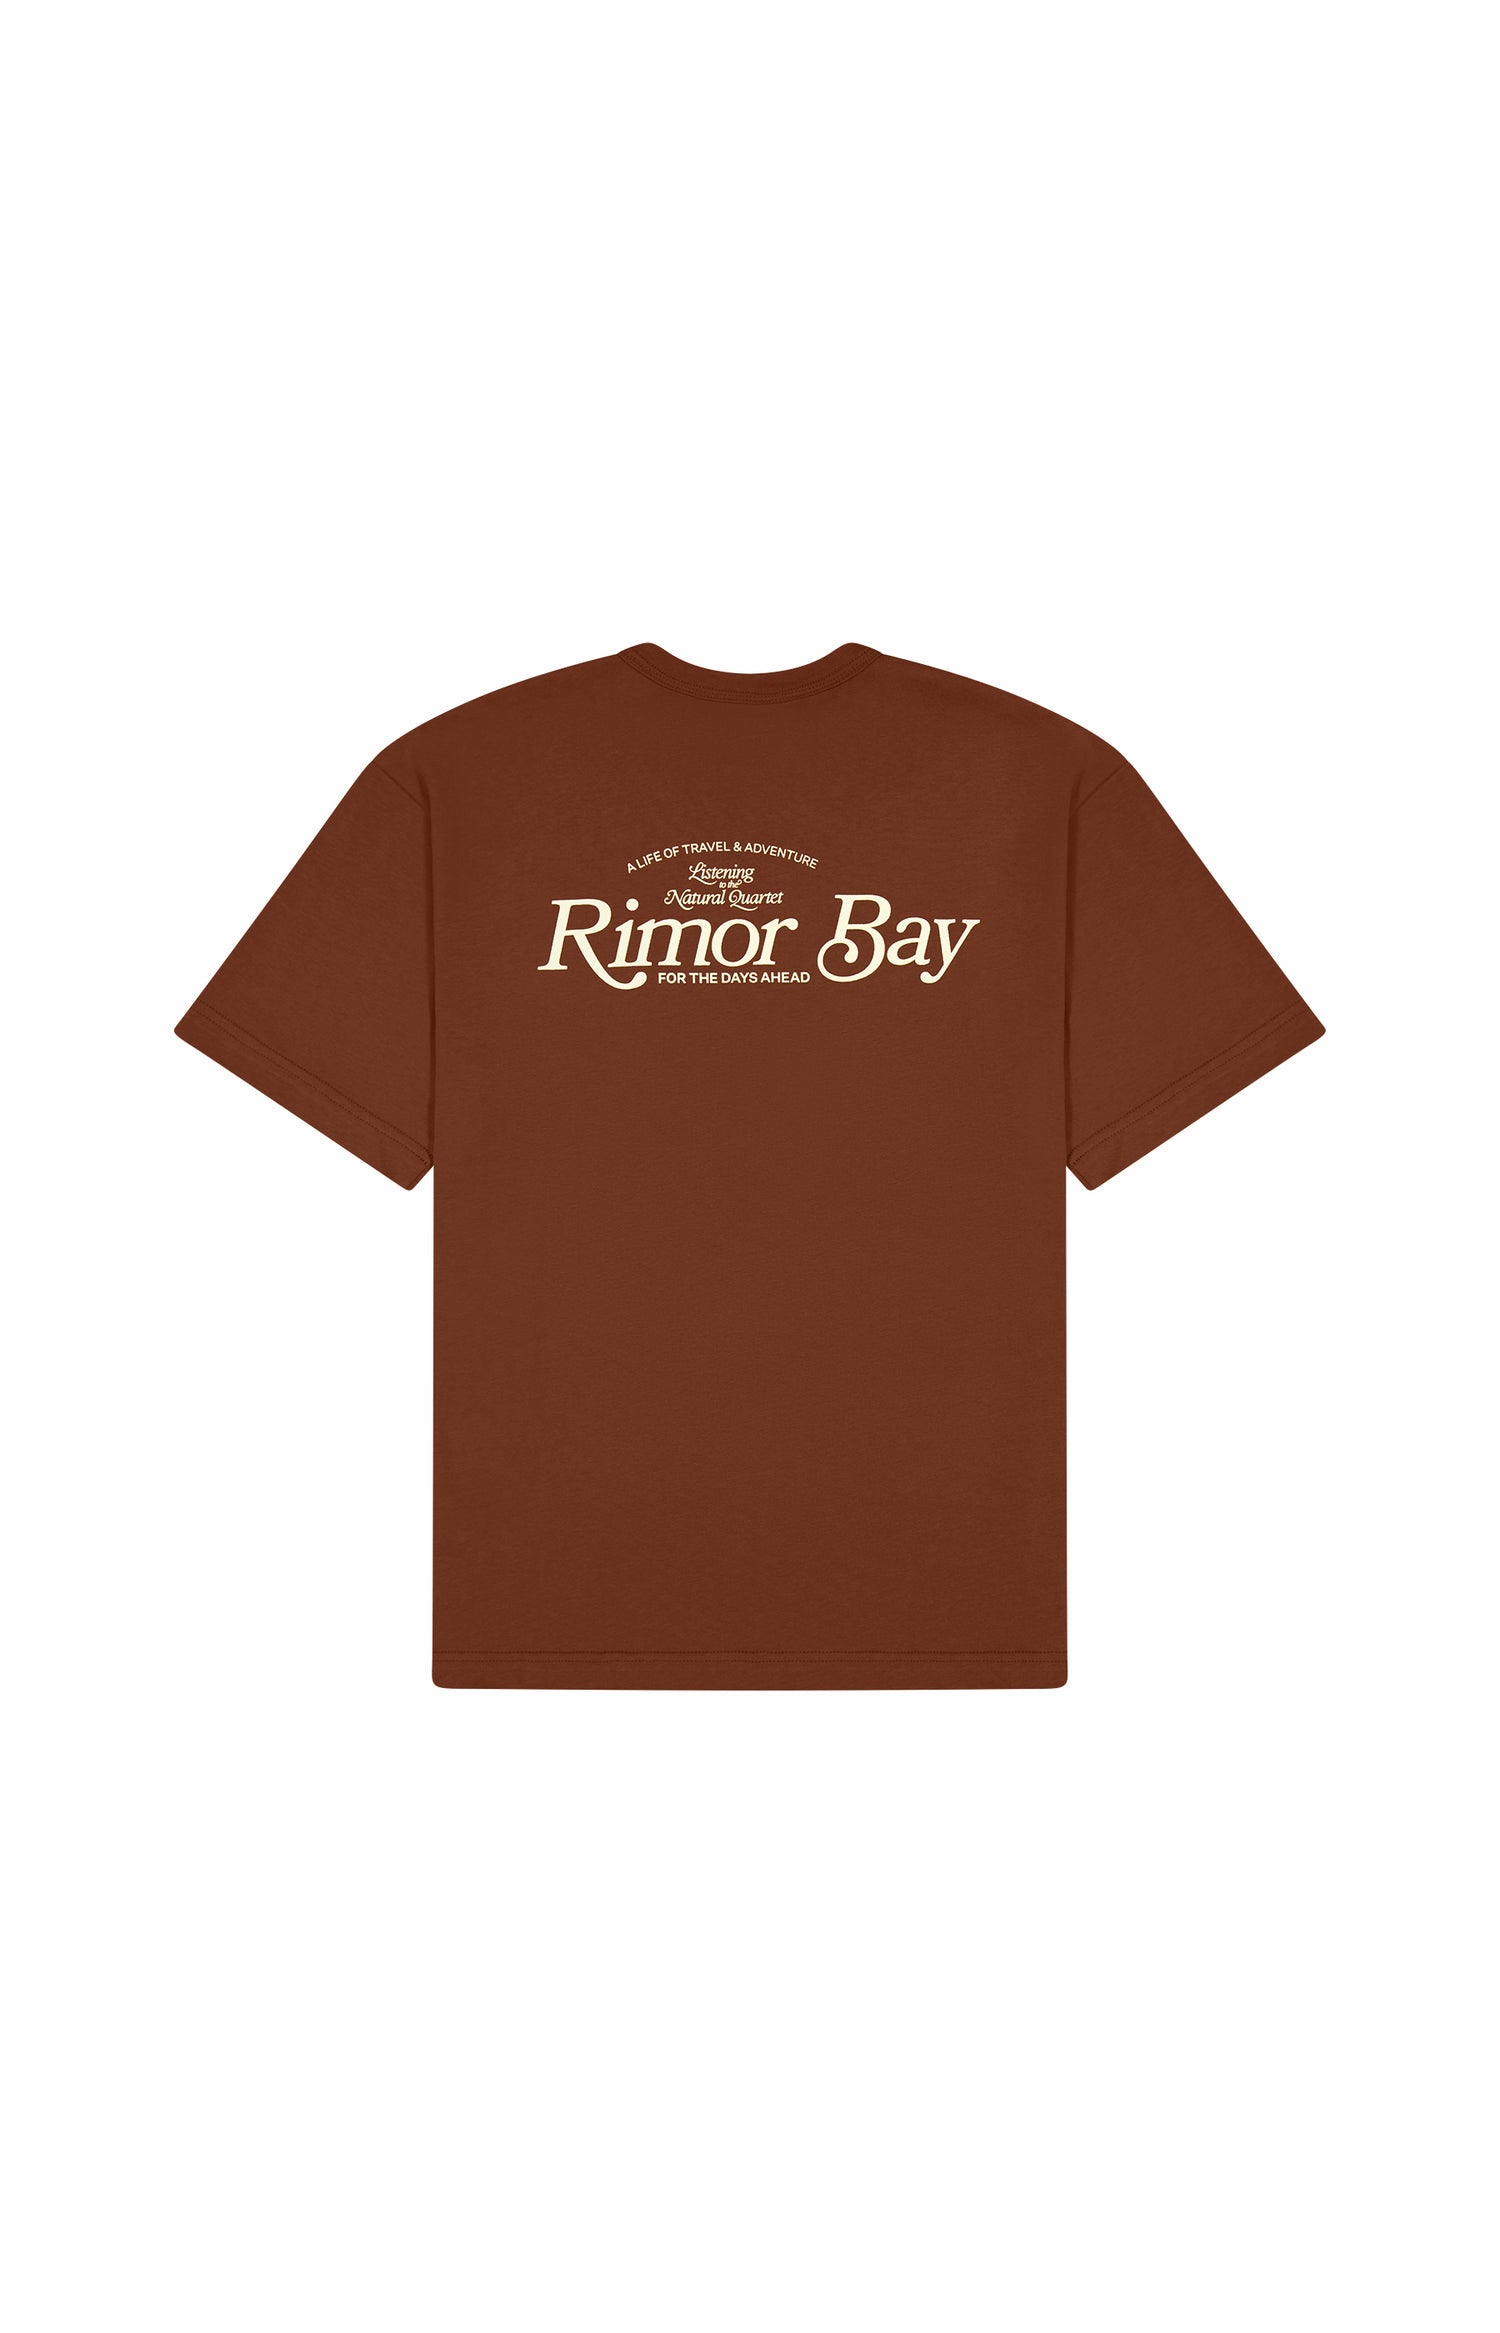 back of brown shortsleeve tshirt with large printed text logo